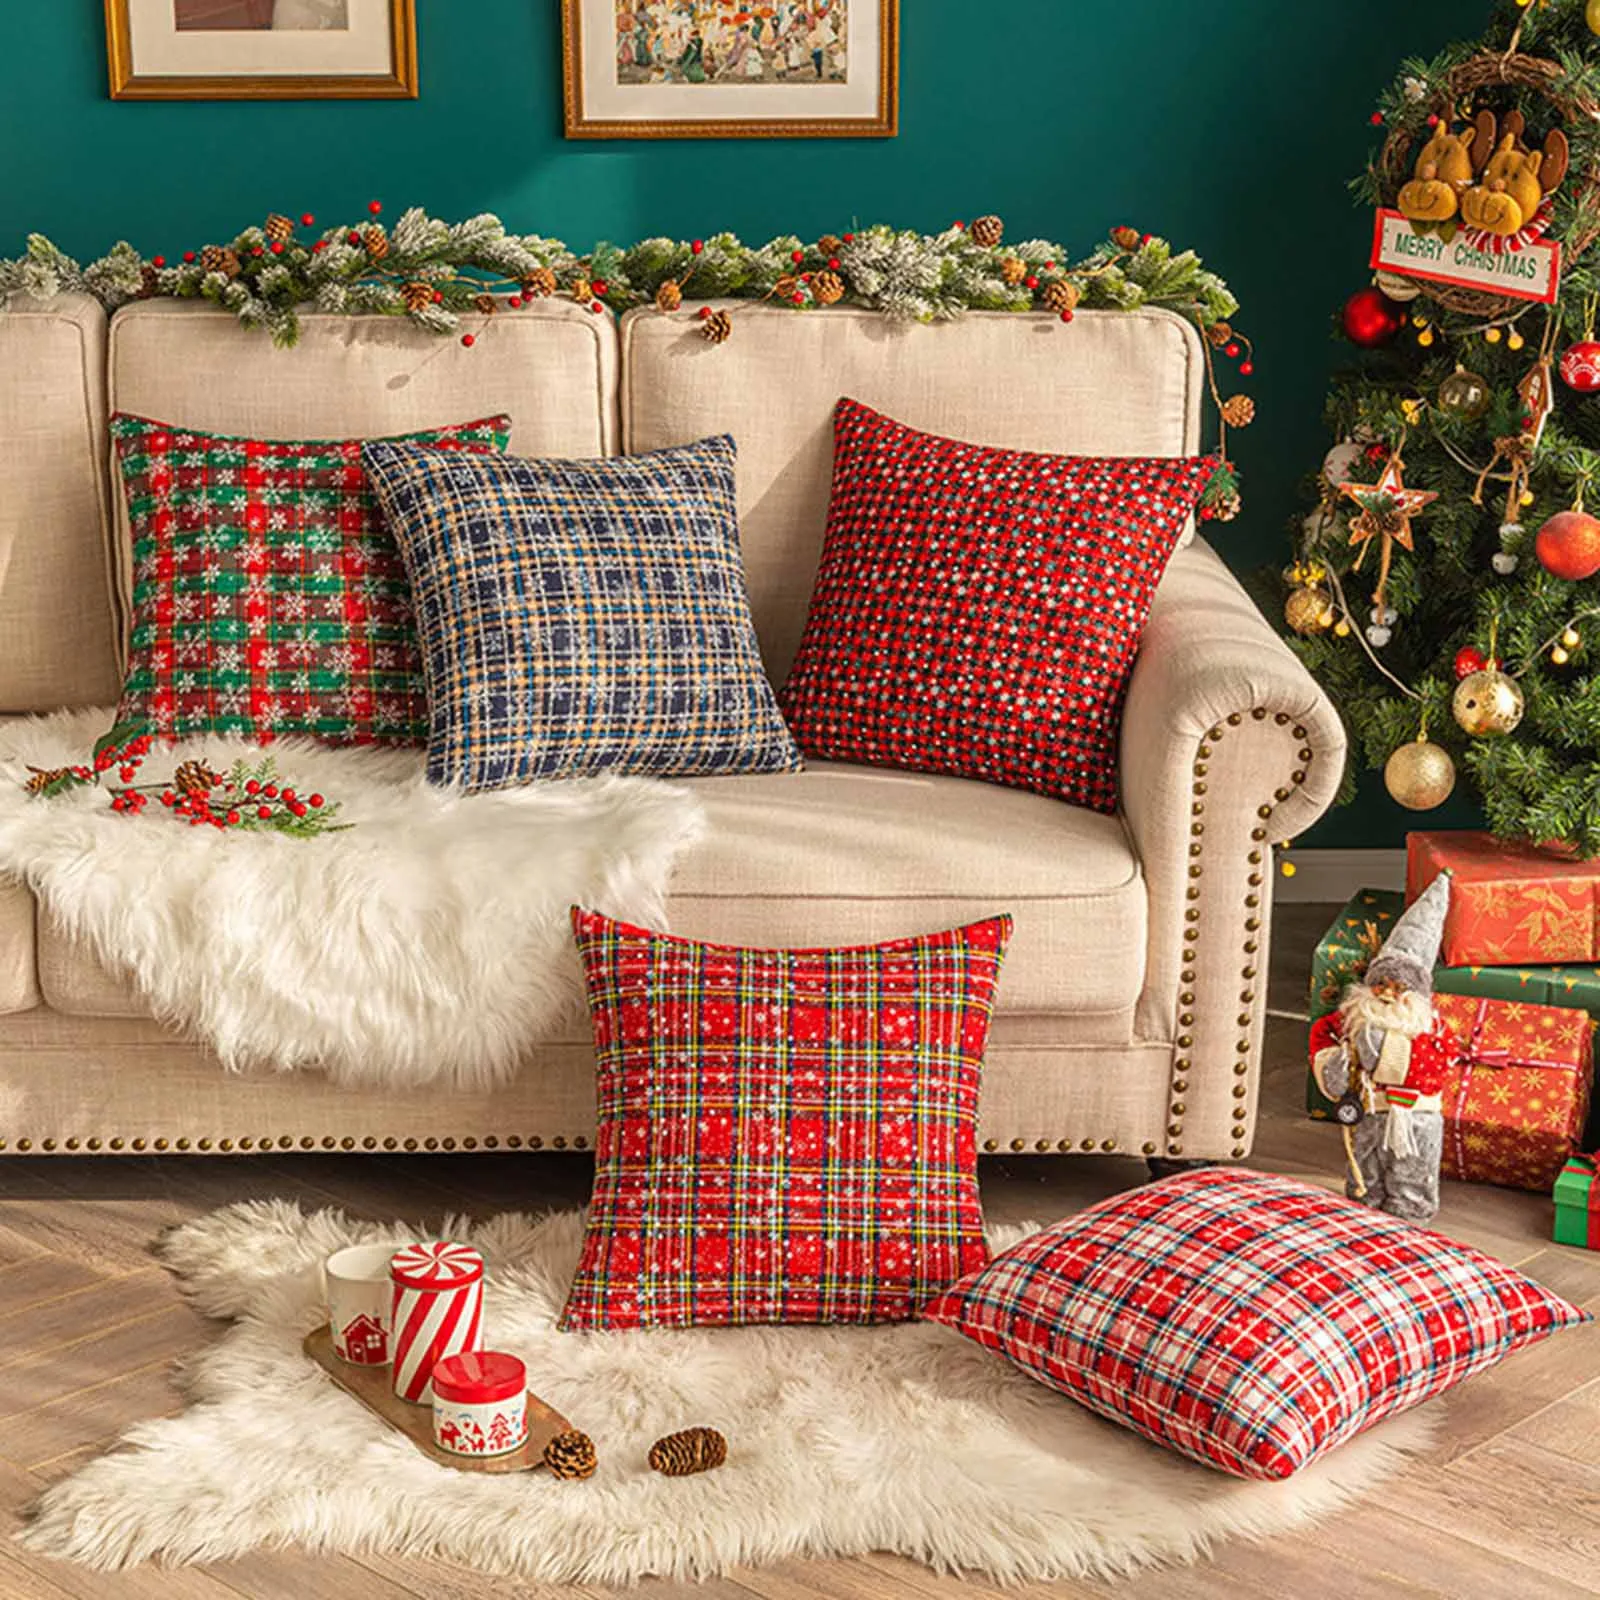 https://ae01.alicdn.com/kf/S97b33dc9f1eb4441a12af82de11e1b9fN/Christmas-Pillow-Covers-Decorative-Red-Plaid-Polyester-Cotton-Pillow-Case-For-Living-Room-Sofa-Decor-Home.jpg